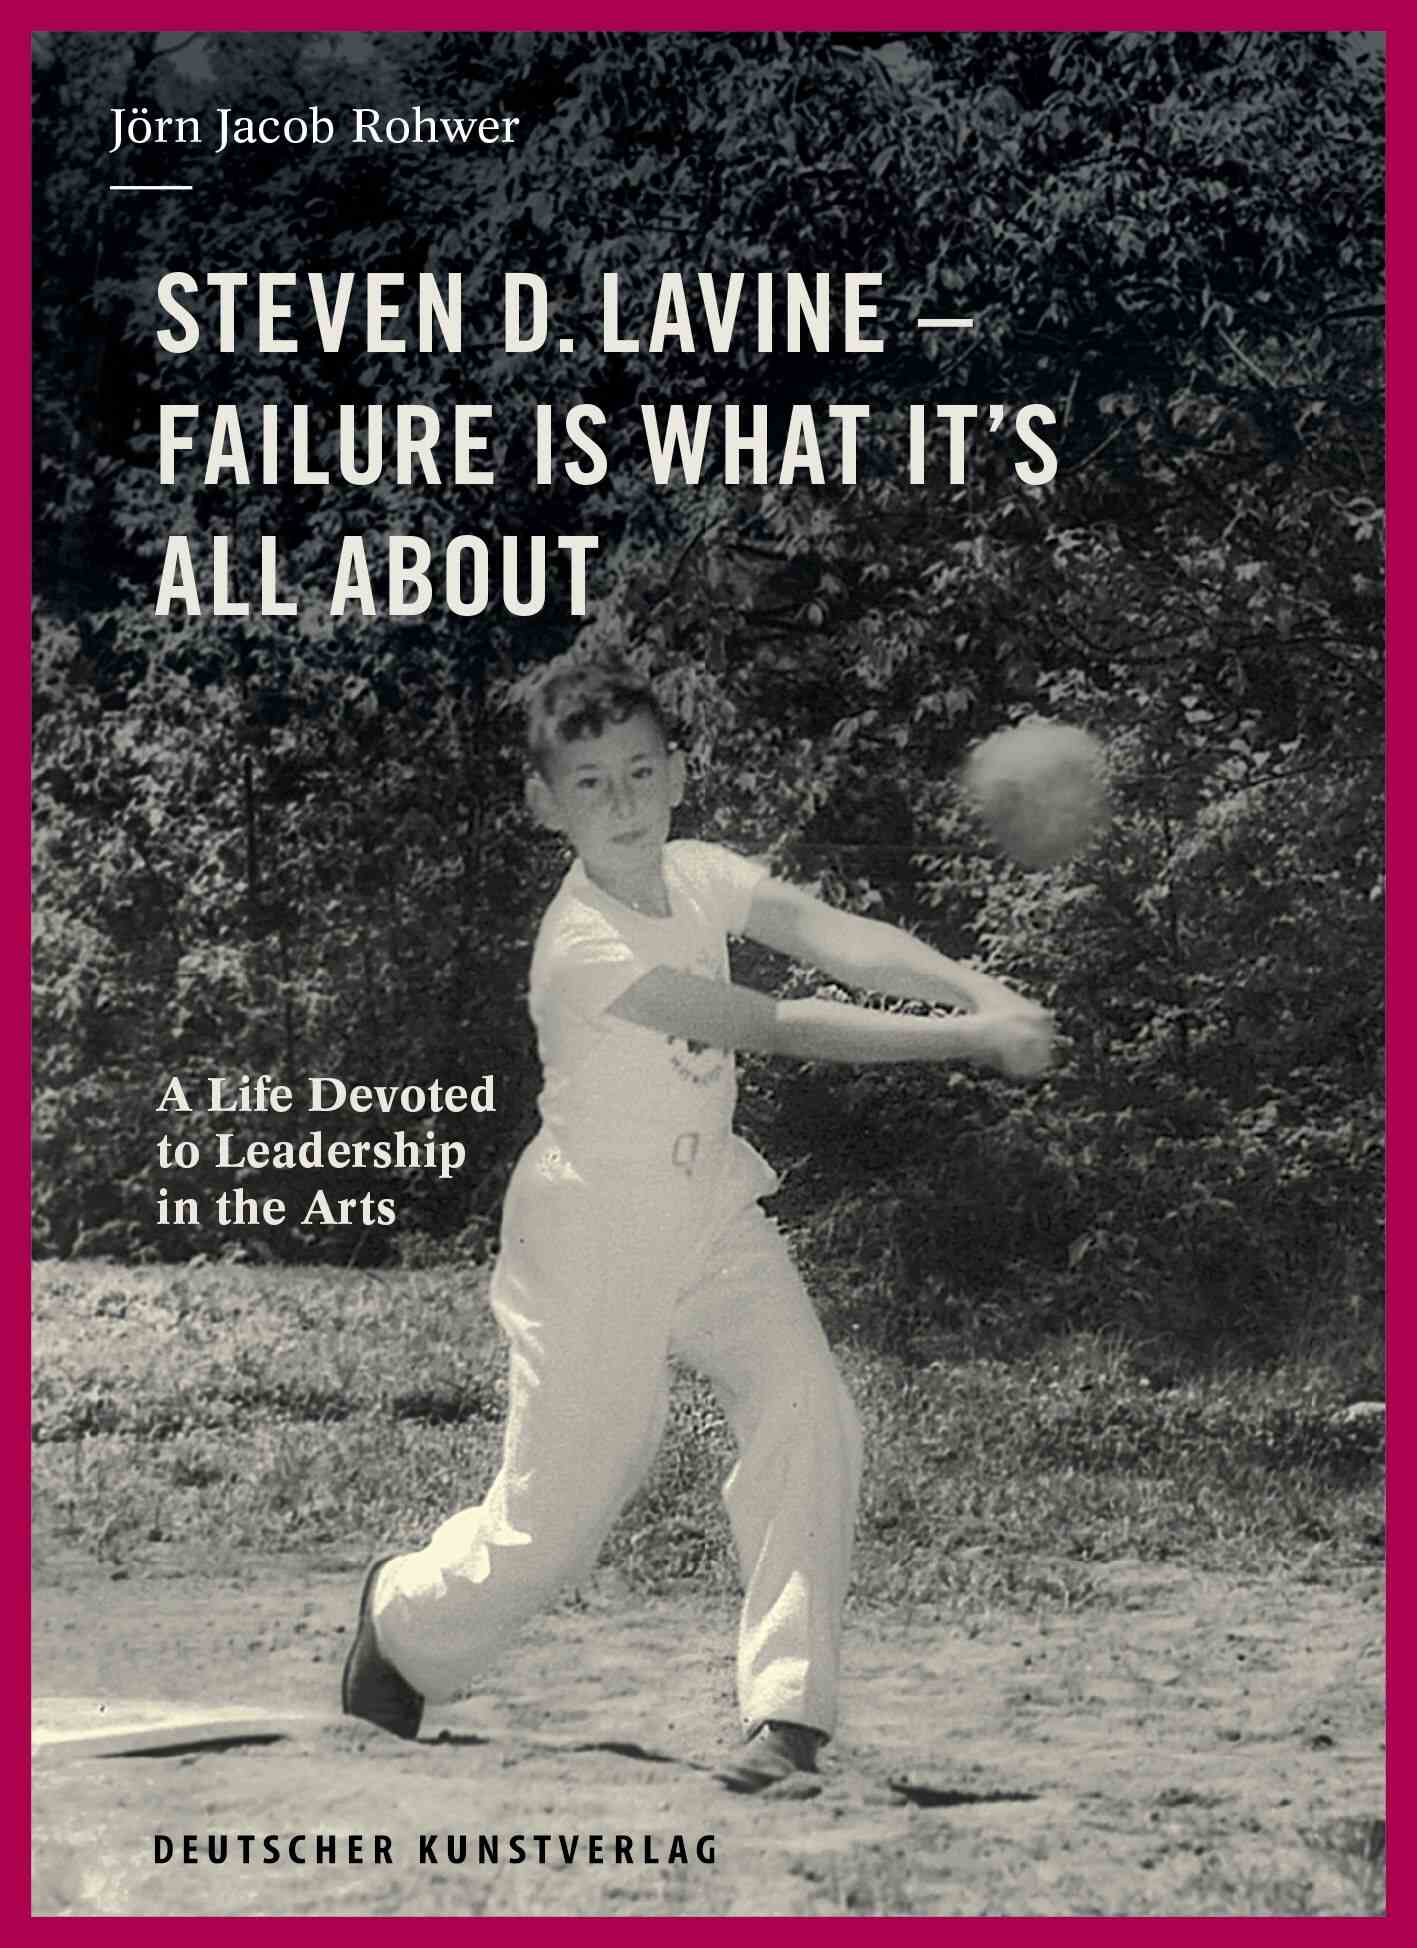 Steven D. Lavine - Failure Is What it's All About by Jorn Jacob Rohwer